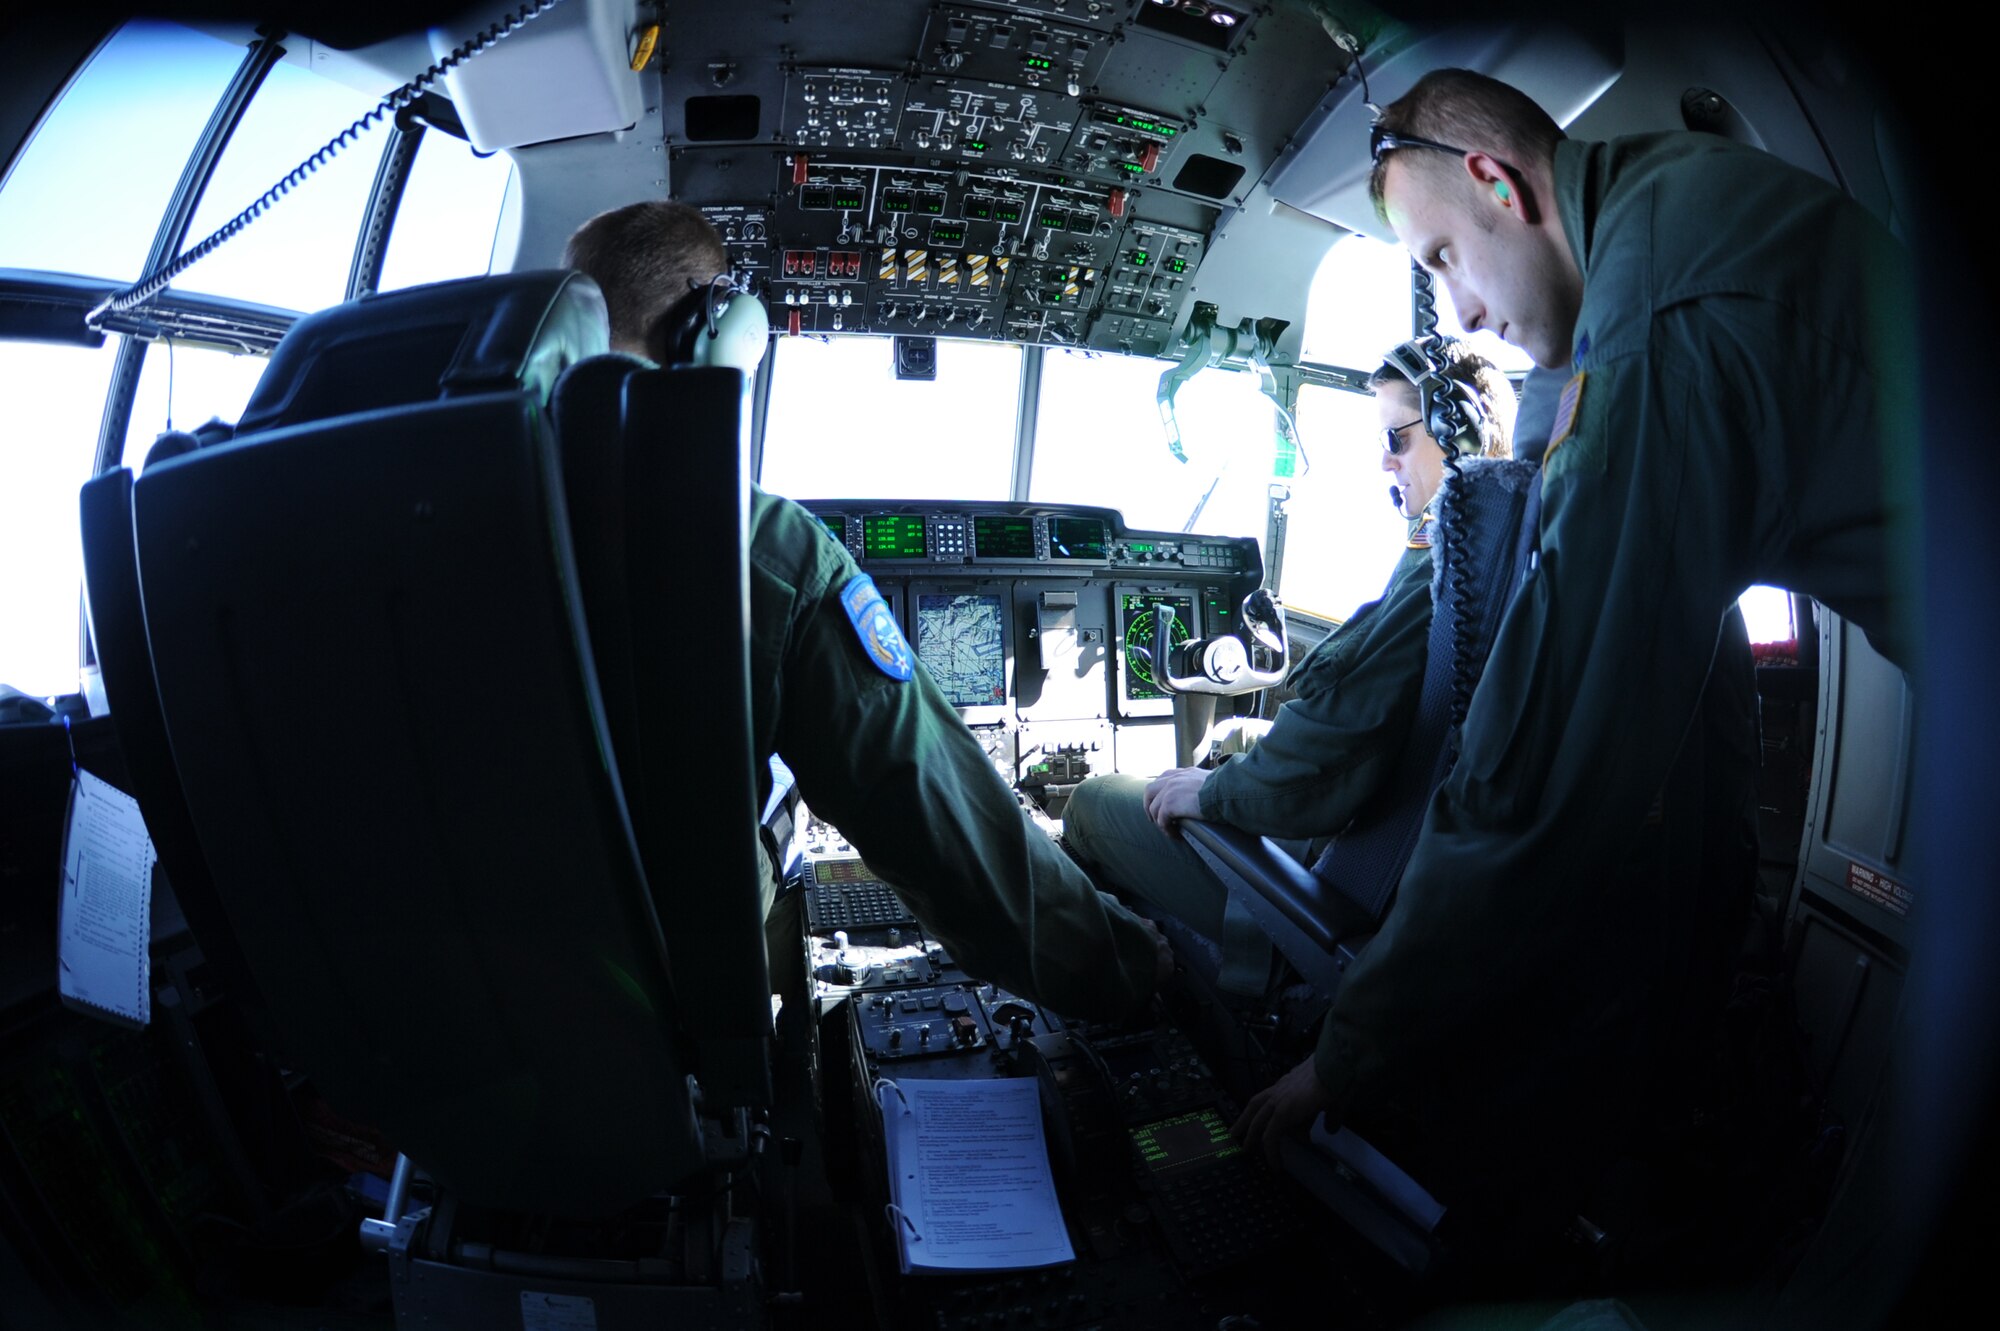 Capt. Christopher Boelscher (left), Maj. Dennis Hamilton (middle) and Capt. Matthew Schoomaker (right), 37th Airlift Squadron pilots, work together to fly more than 20 Airmen to Romania to participate in Exercise Carpathian Spring, April 14, 2013, Bucharest, Romania. The exercise runs through April 21 and is designed for aircrews to train as well as help build a partnership capacity with Romanians. (U.S. Air Force photo/Airman 1st Class Hailey Haux)